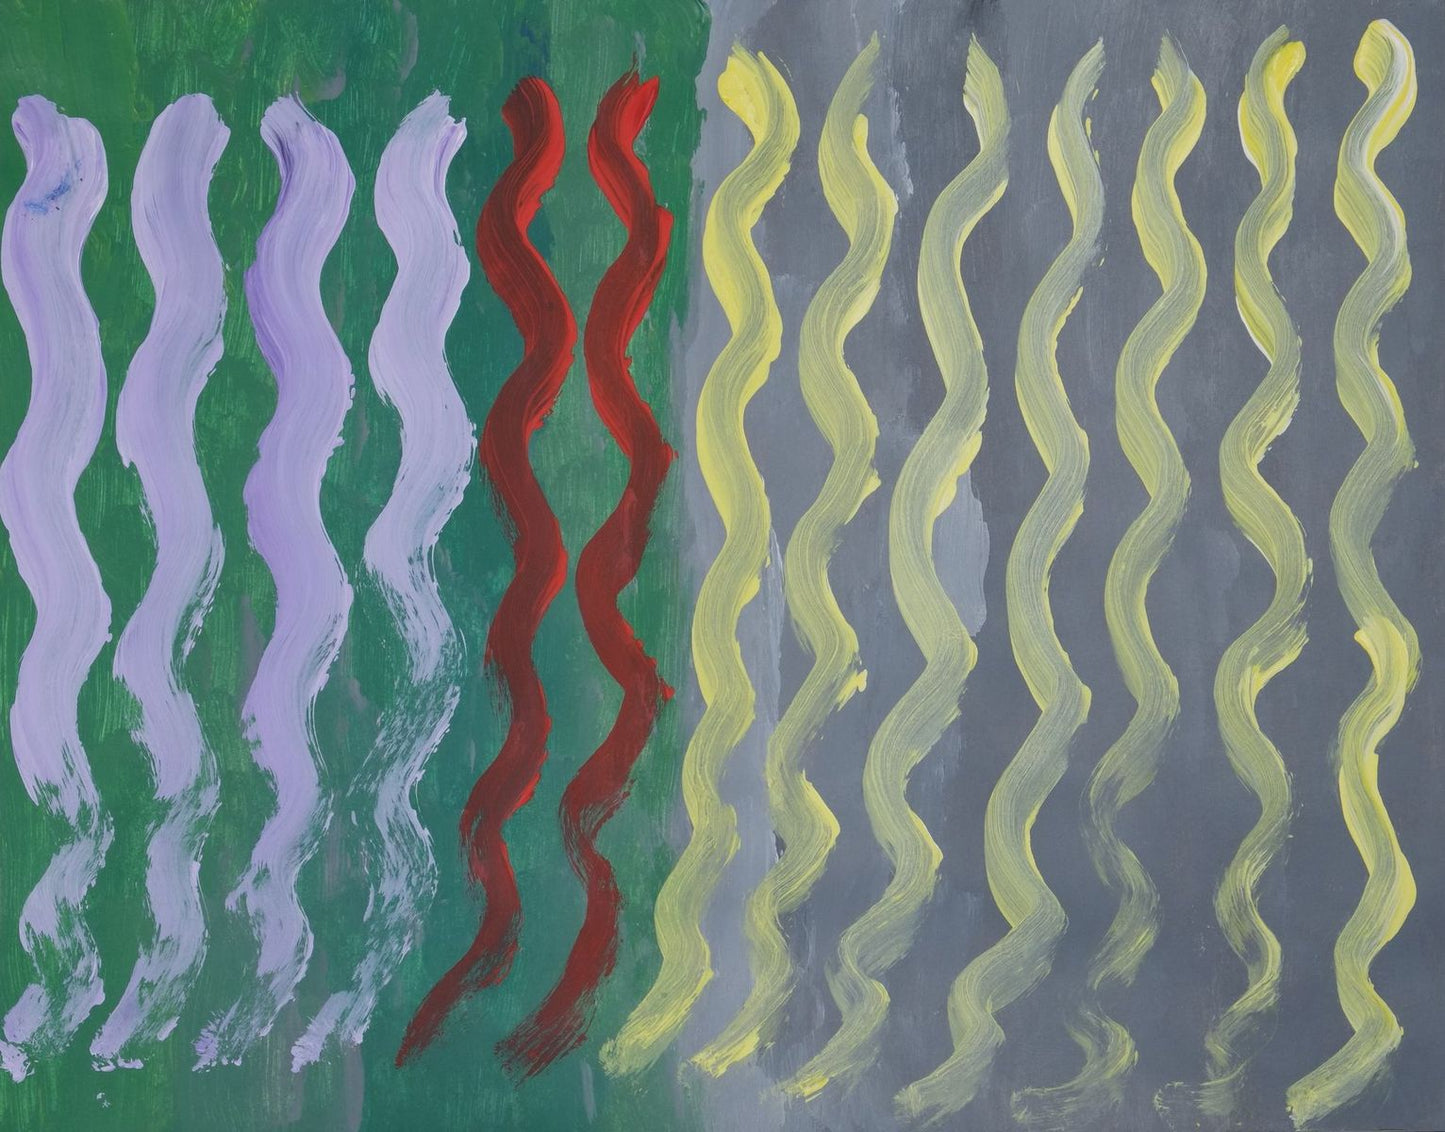 the left Half of the background is green teal and the right is gray. On top of the gray half are seven light yellow squiggles going down the page. On top of the green half to the left are four light purple squiggles that fade into the green, beside it in the center of the painting are two red squiggles